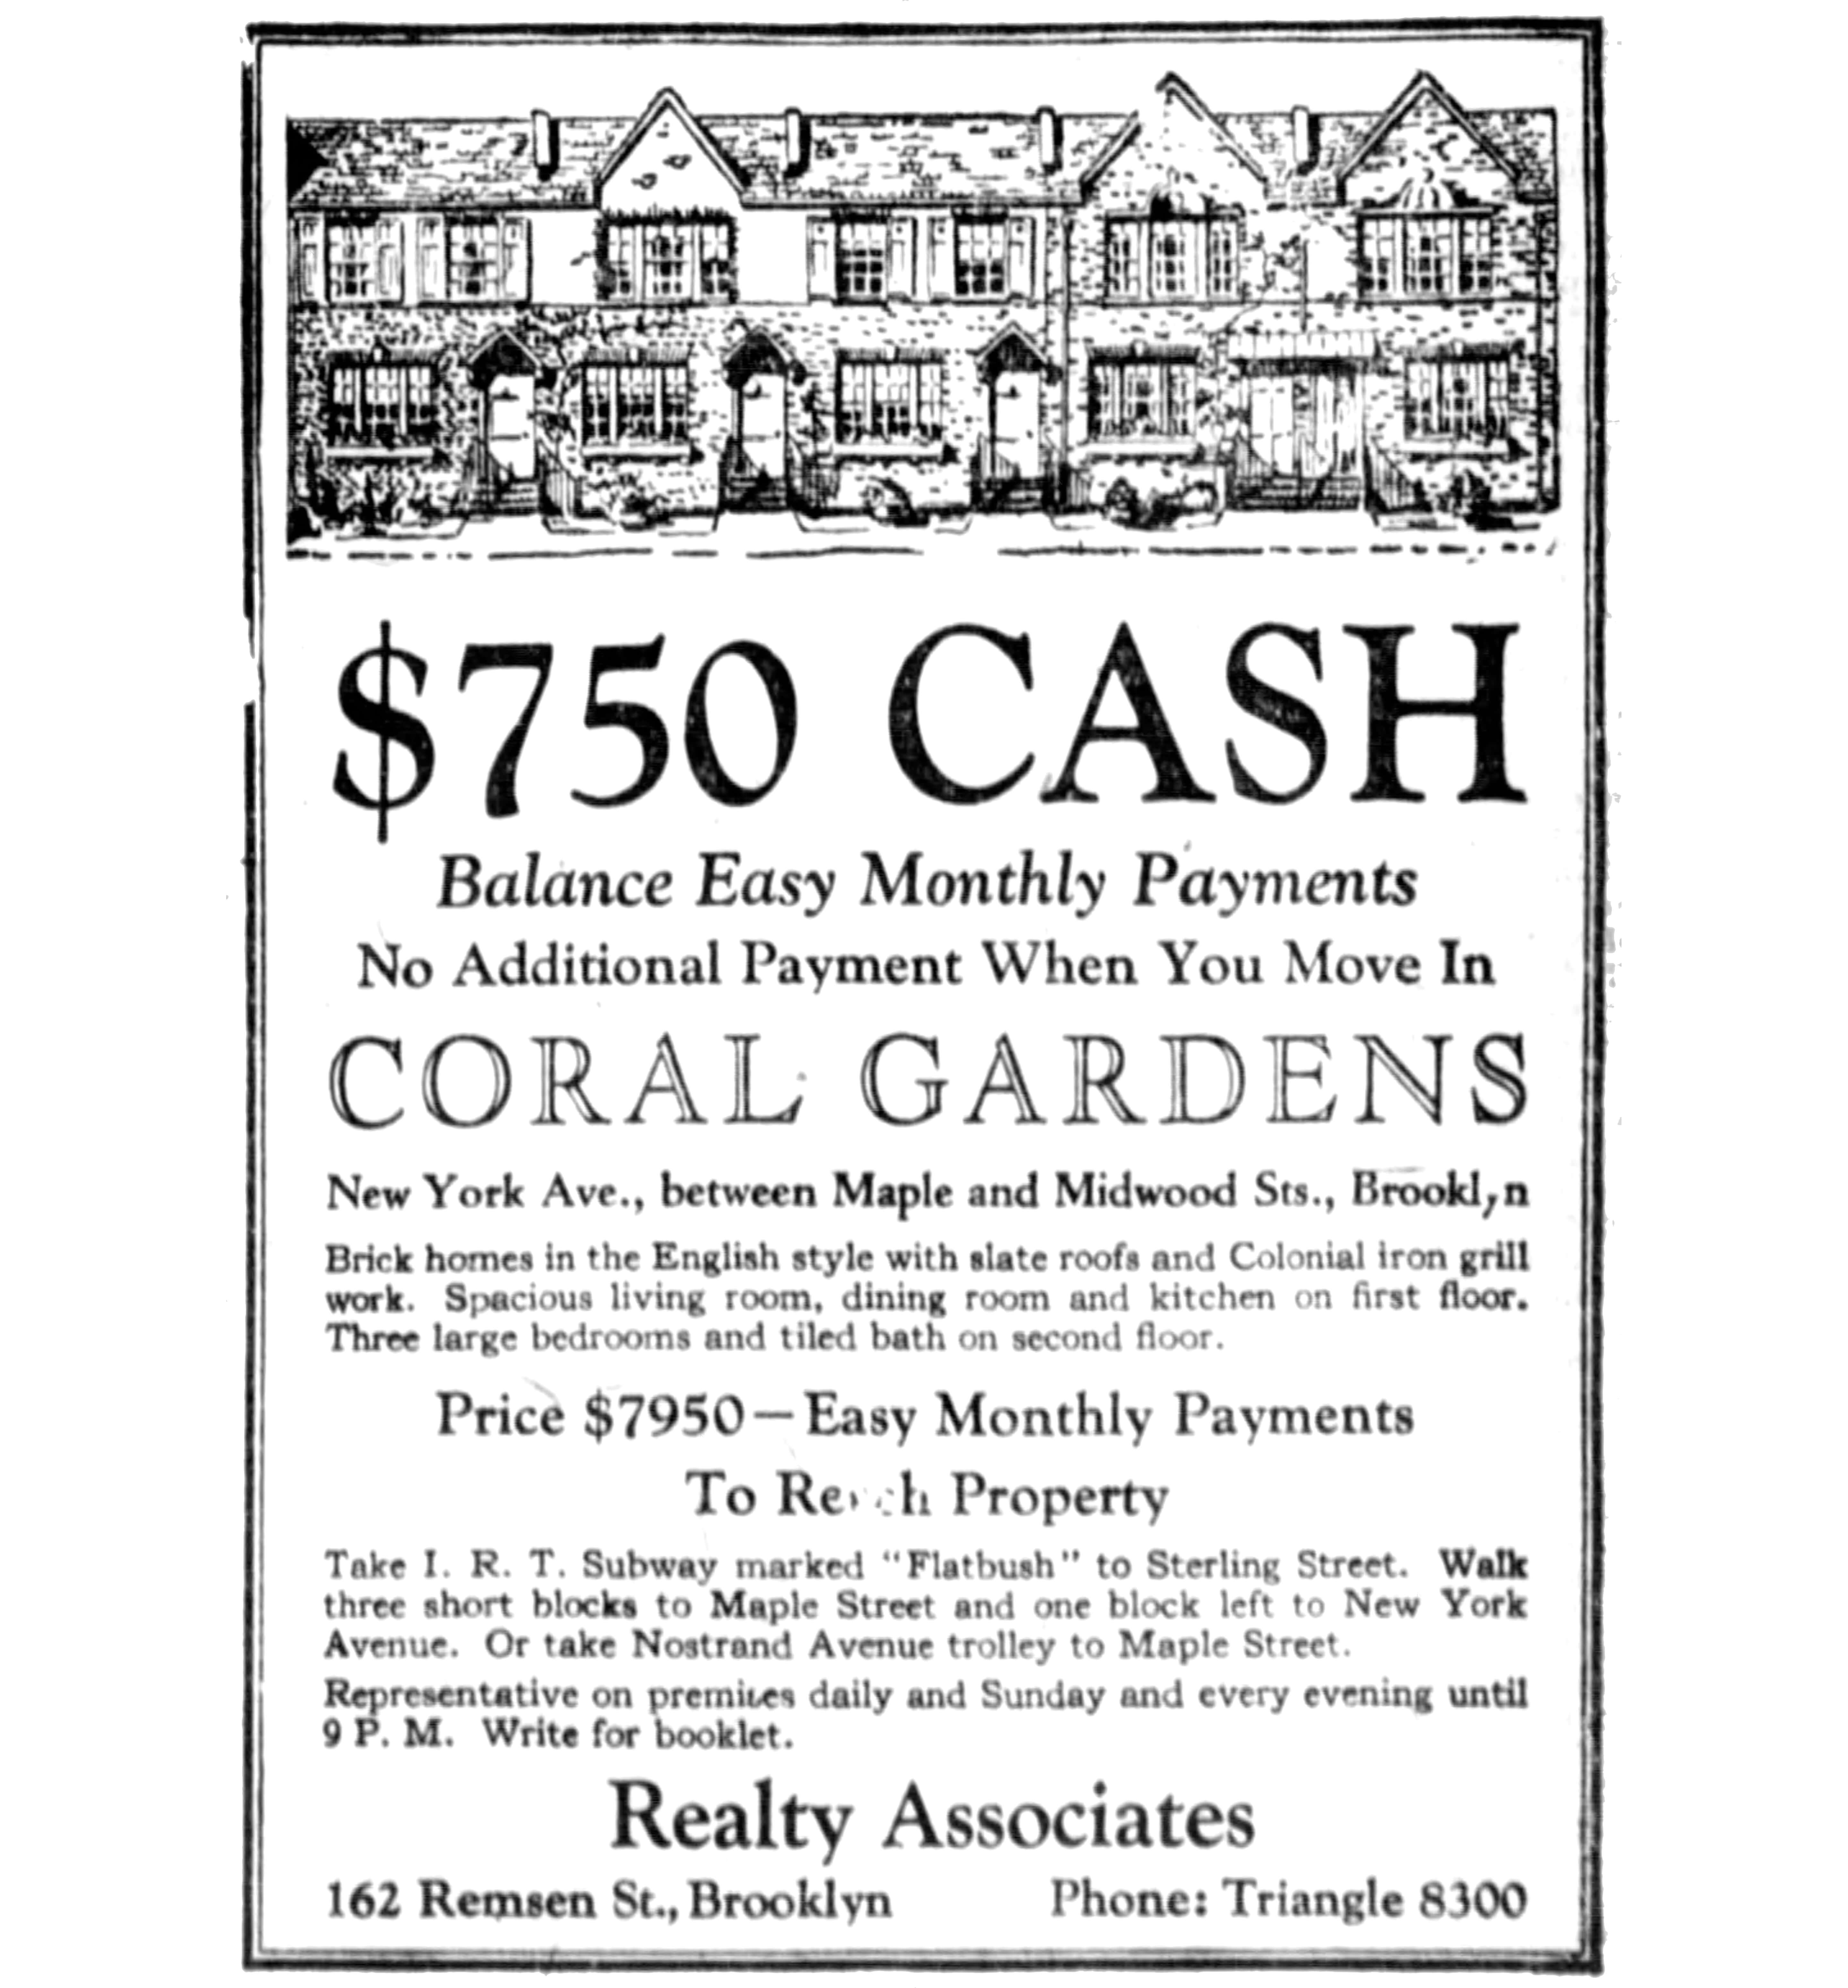 A 1925 ad for Coral Gardens